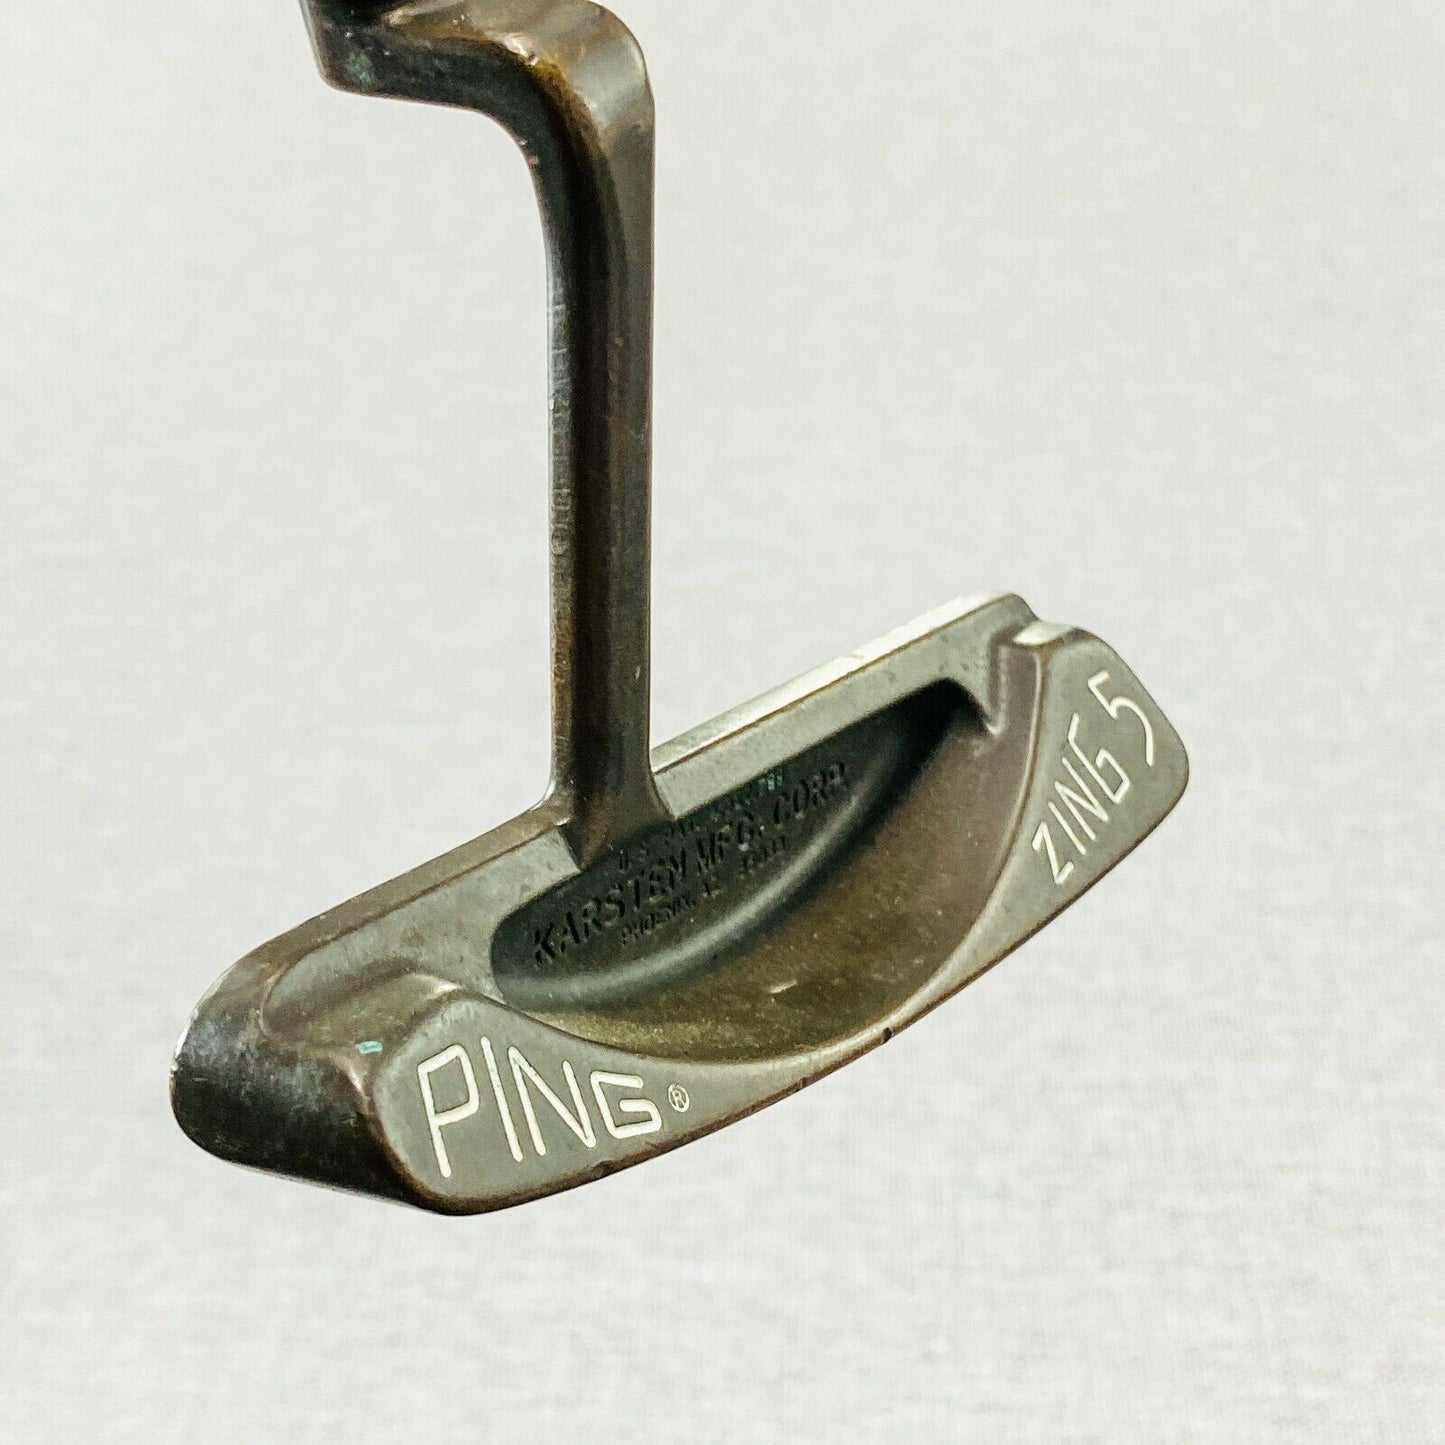 PING Zing 5 Beryllium Copper Putter. 35 inch - Very Good Condition # 11204